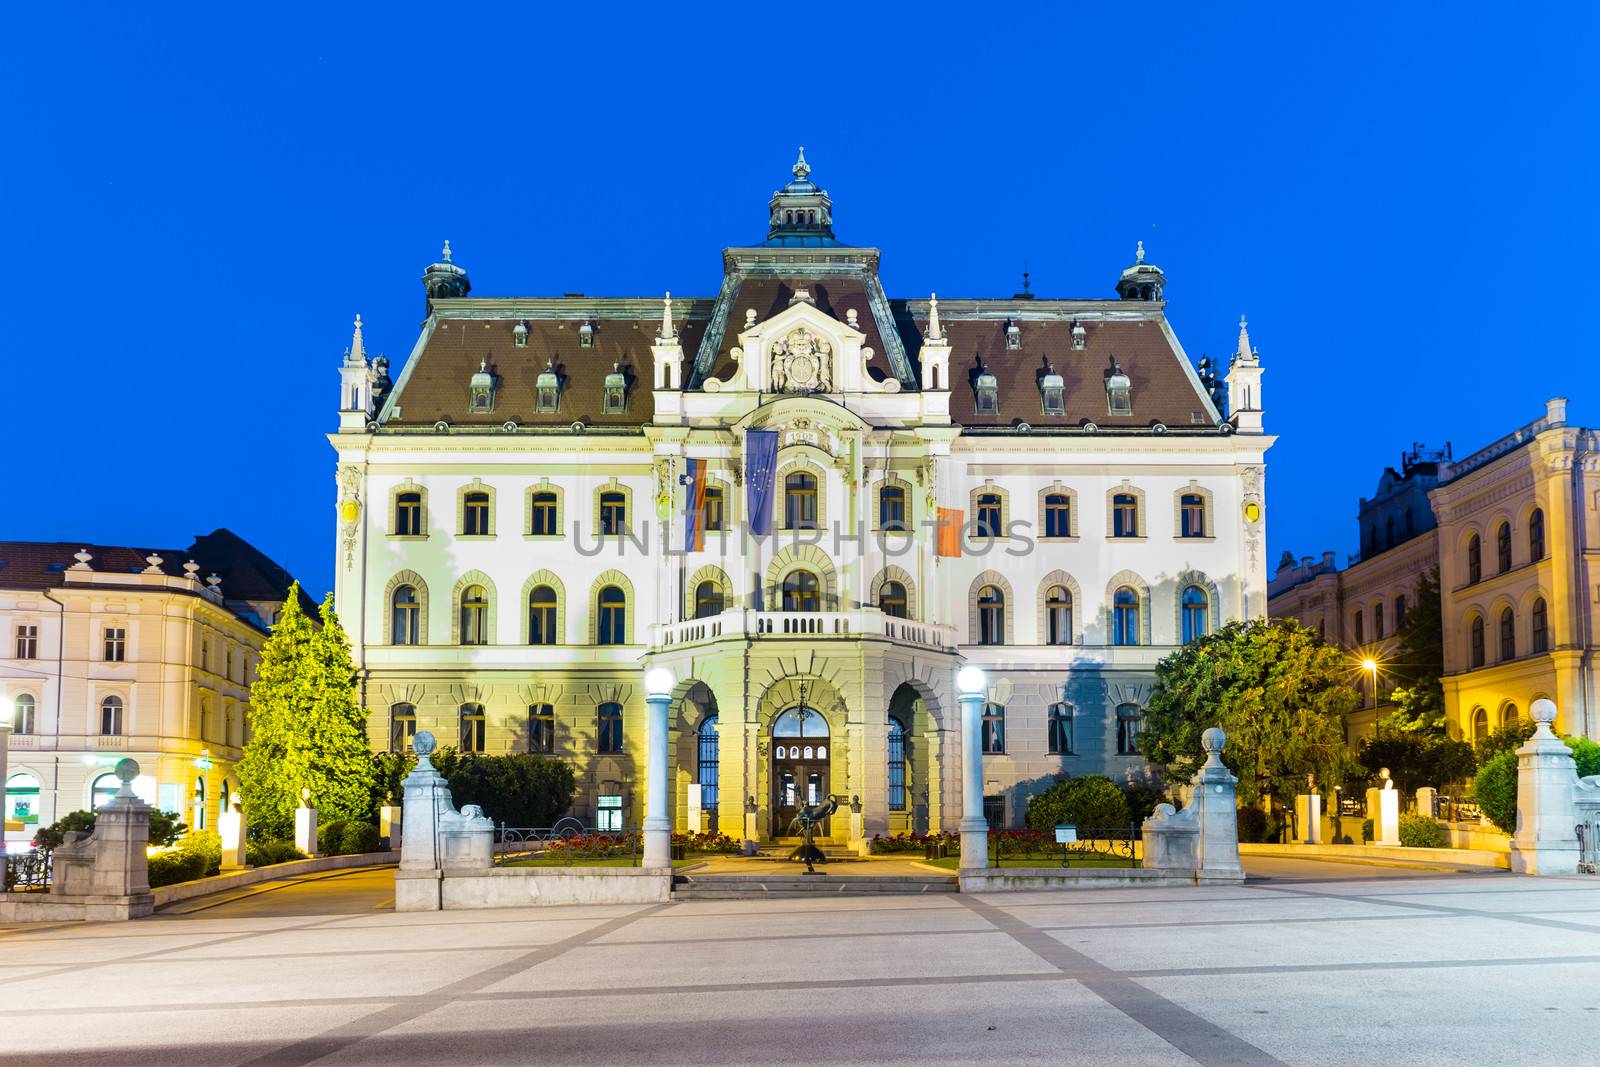 Headquarters building of University of Ljubljana, Slovenia, Europe. One of the sights in the capital.